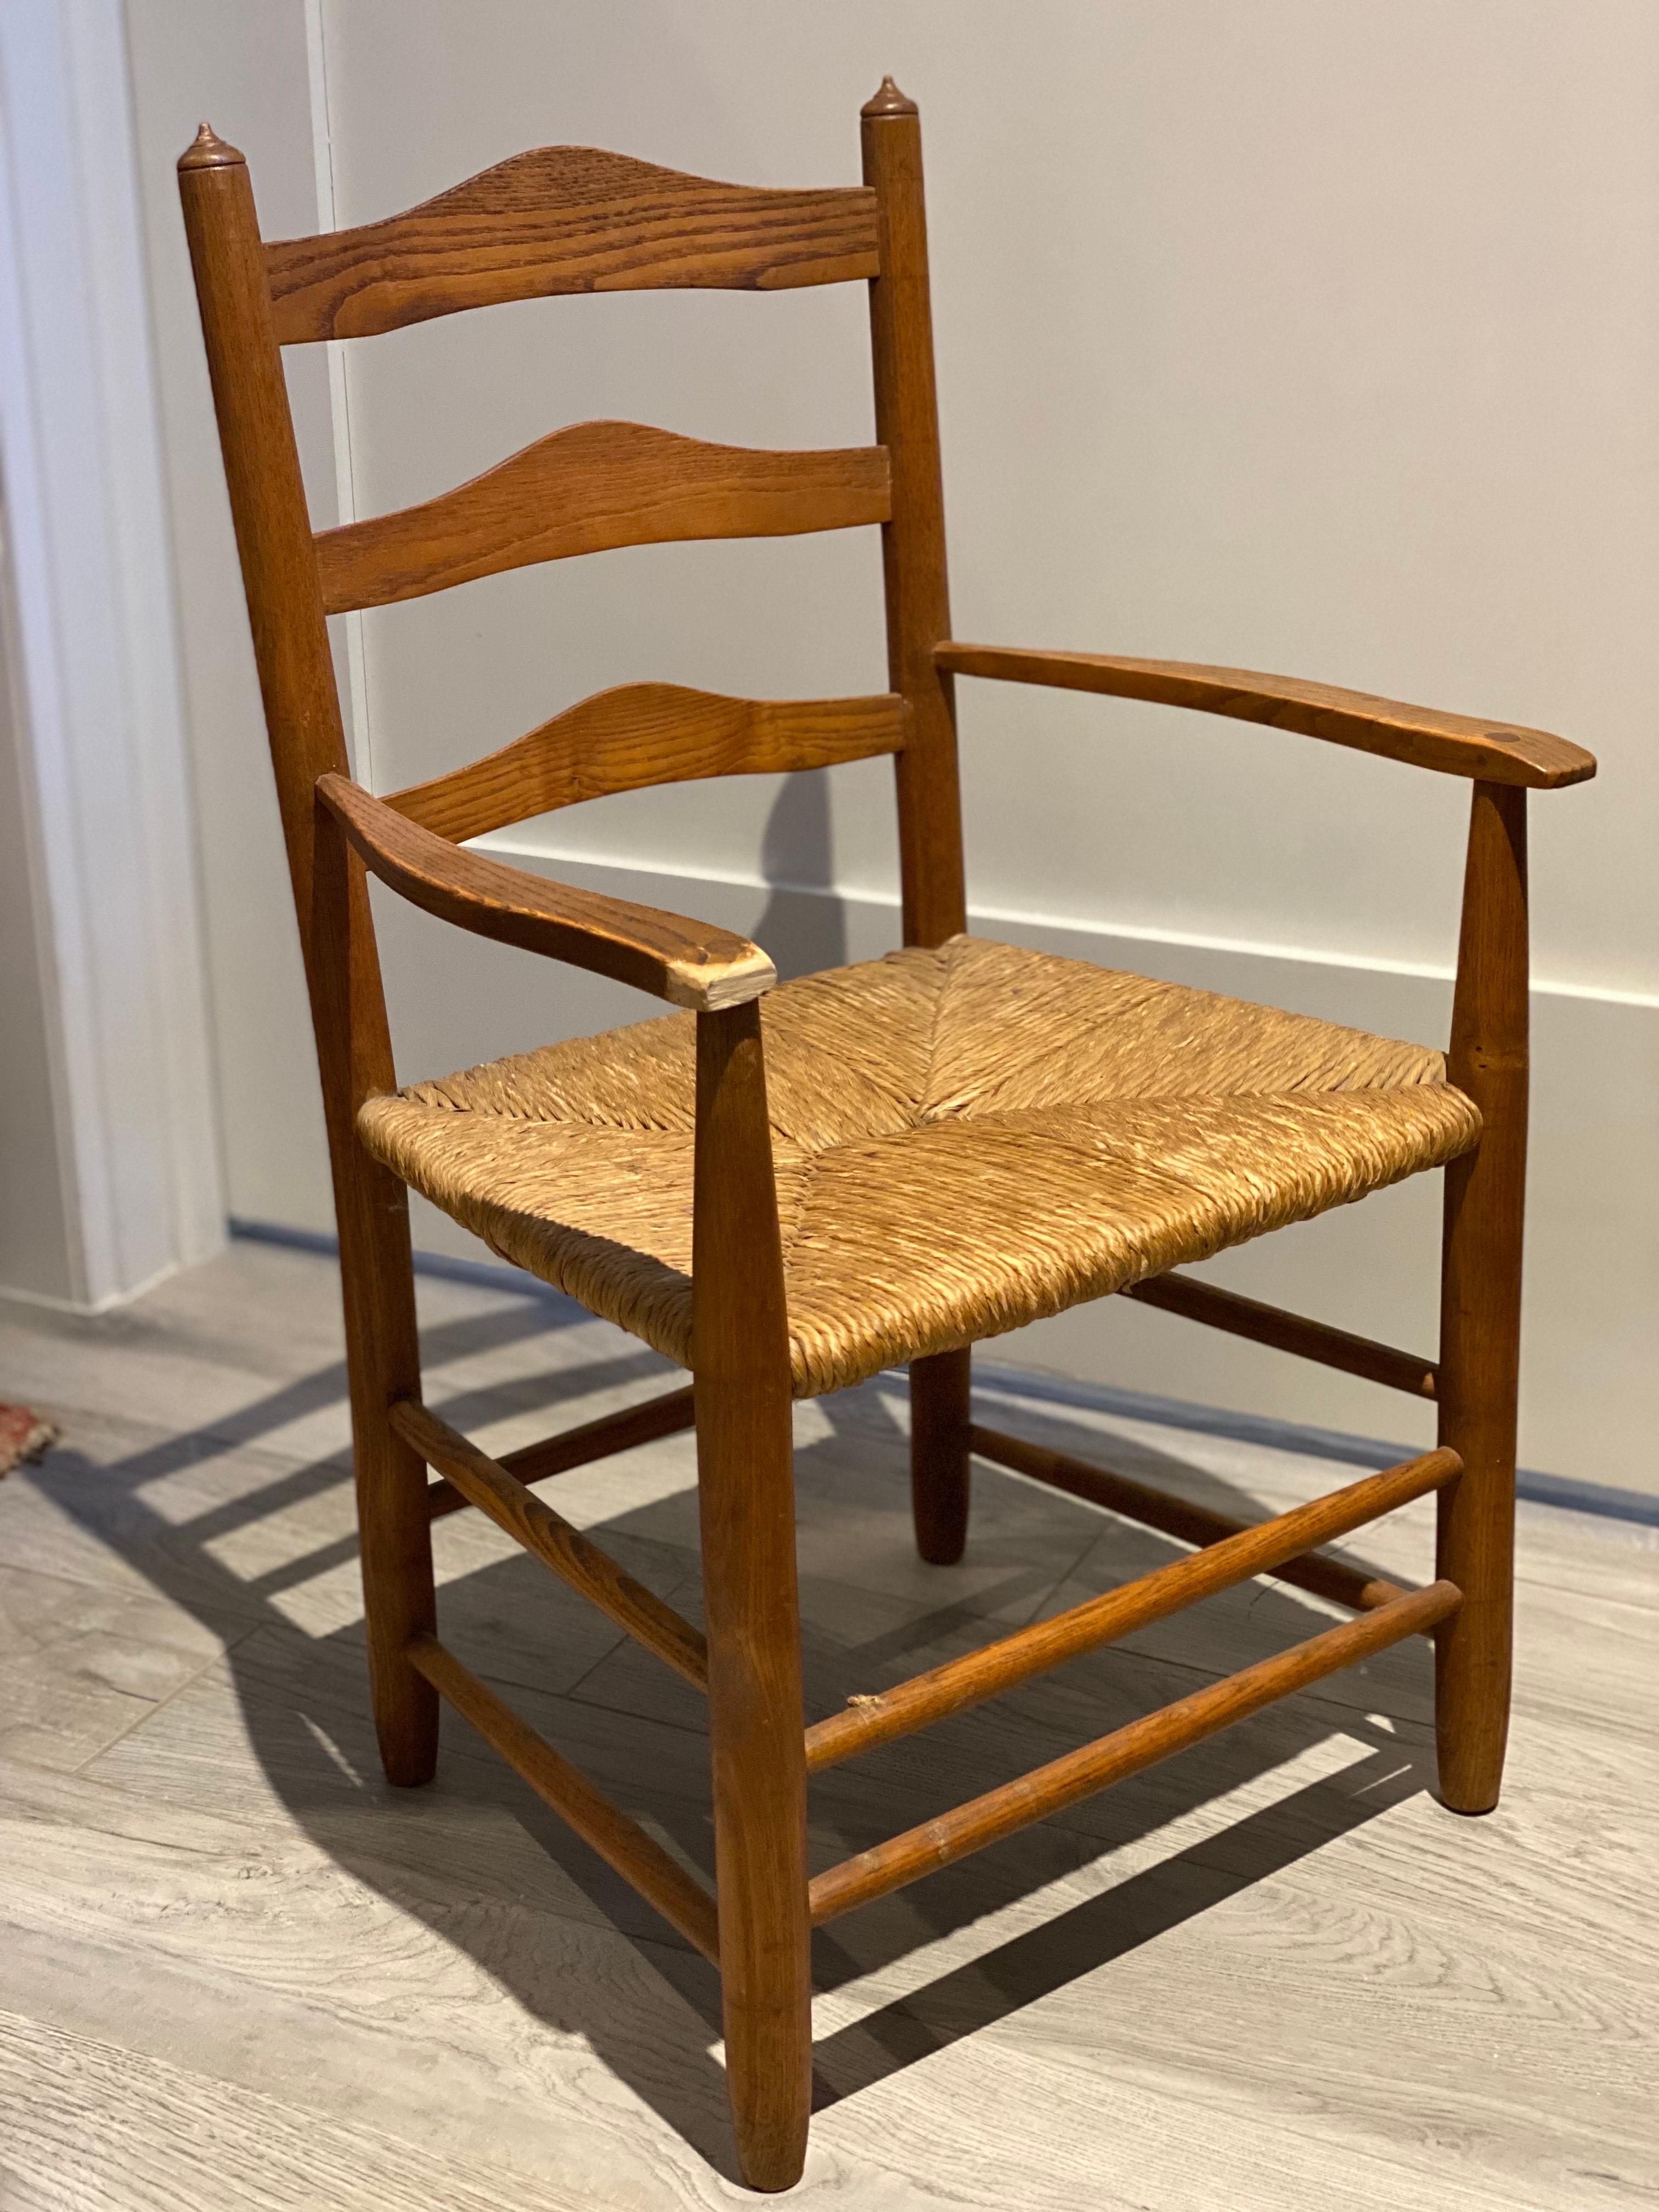 A Child's Wooden Chair with Handwoven Rush Seat, American, Late 20th Century.
Made of wood to fit a small child, probably a toddler to young elementary school age. Finely crafted wood frame with handwoven rush seat. End of right arm has been cut